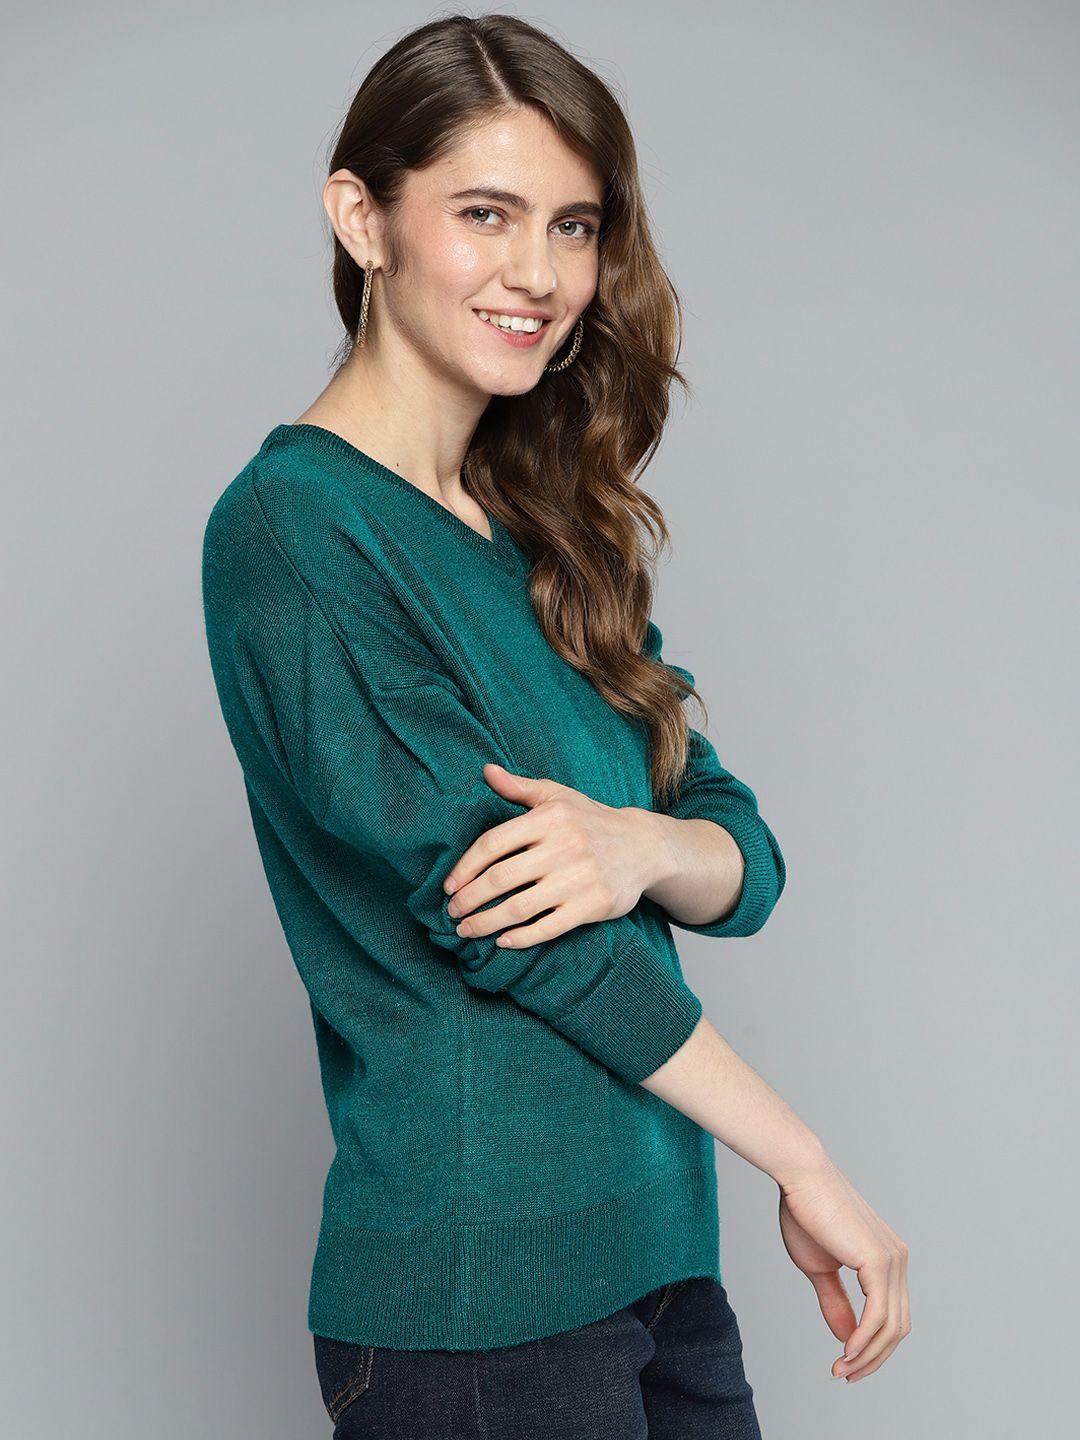 here&now women teal green solid v-neck pullover with sheen detail